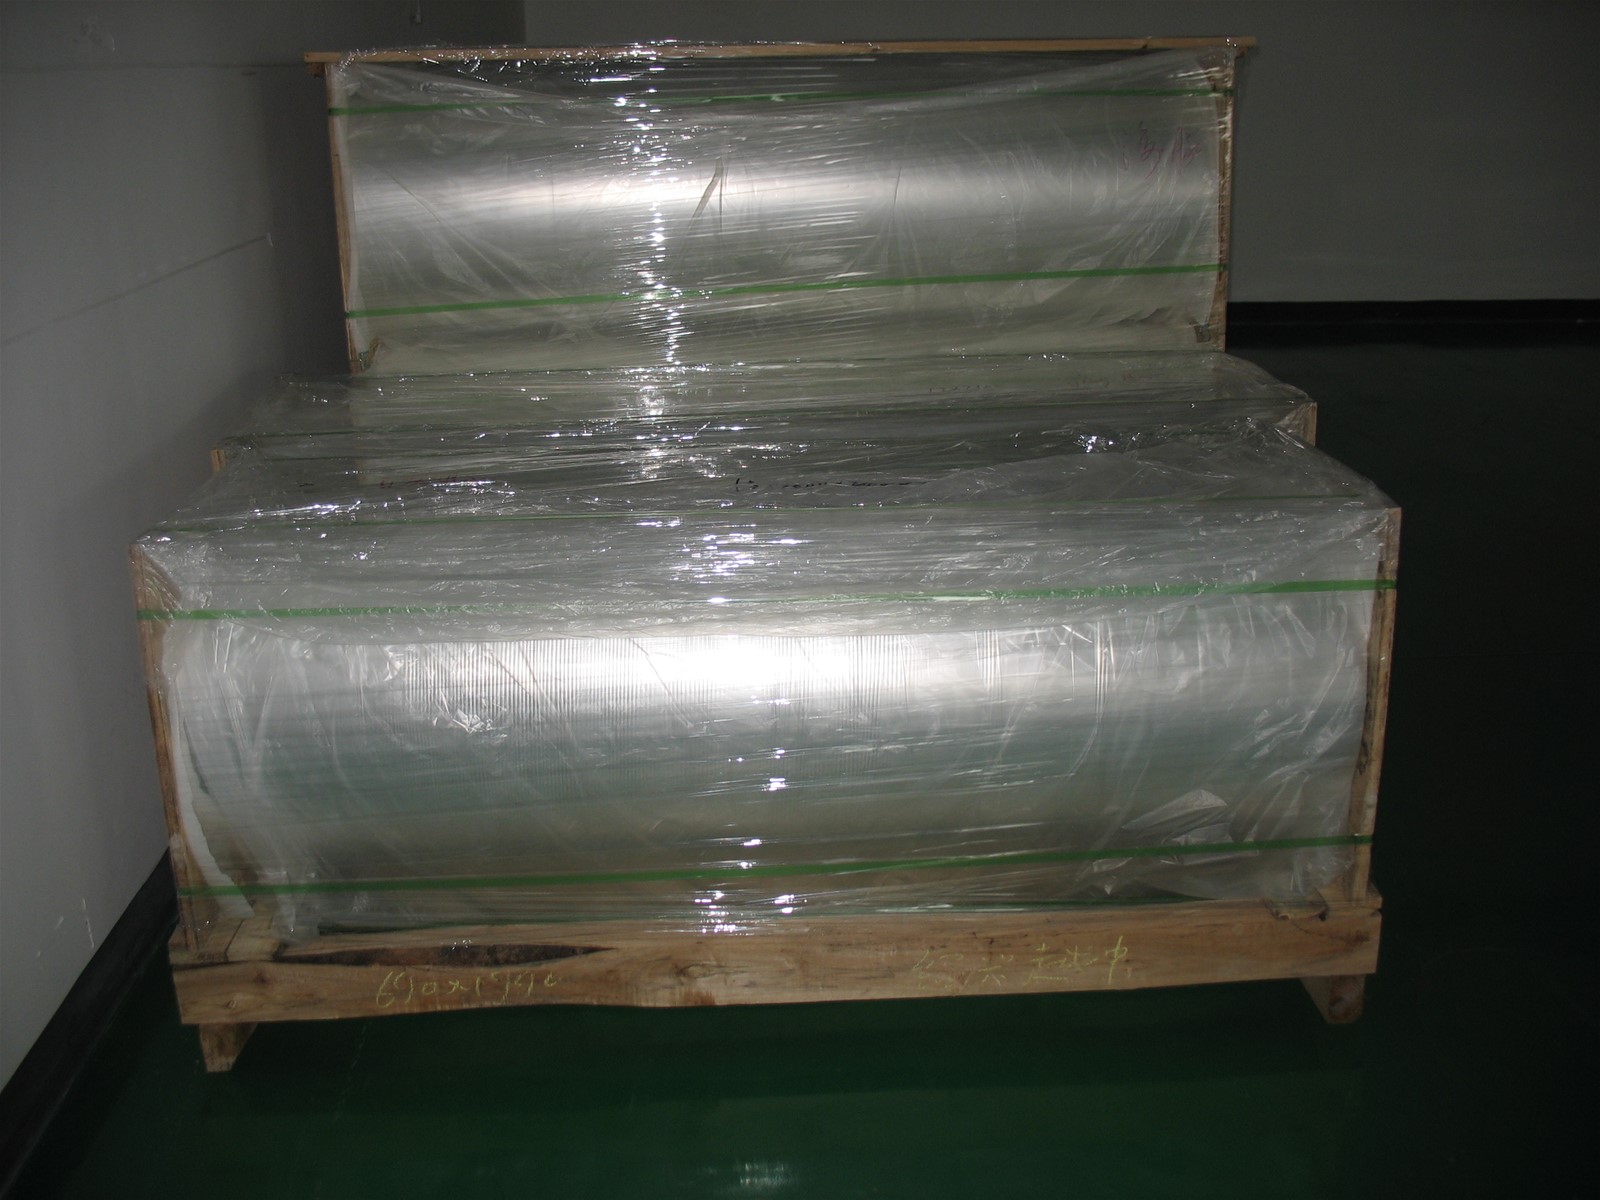 Heat Sealable Polyester Film